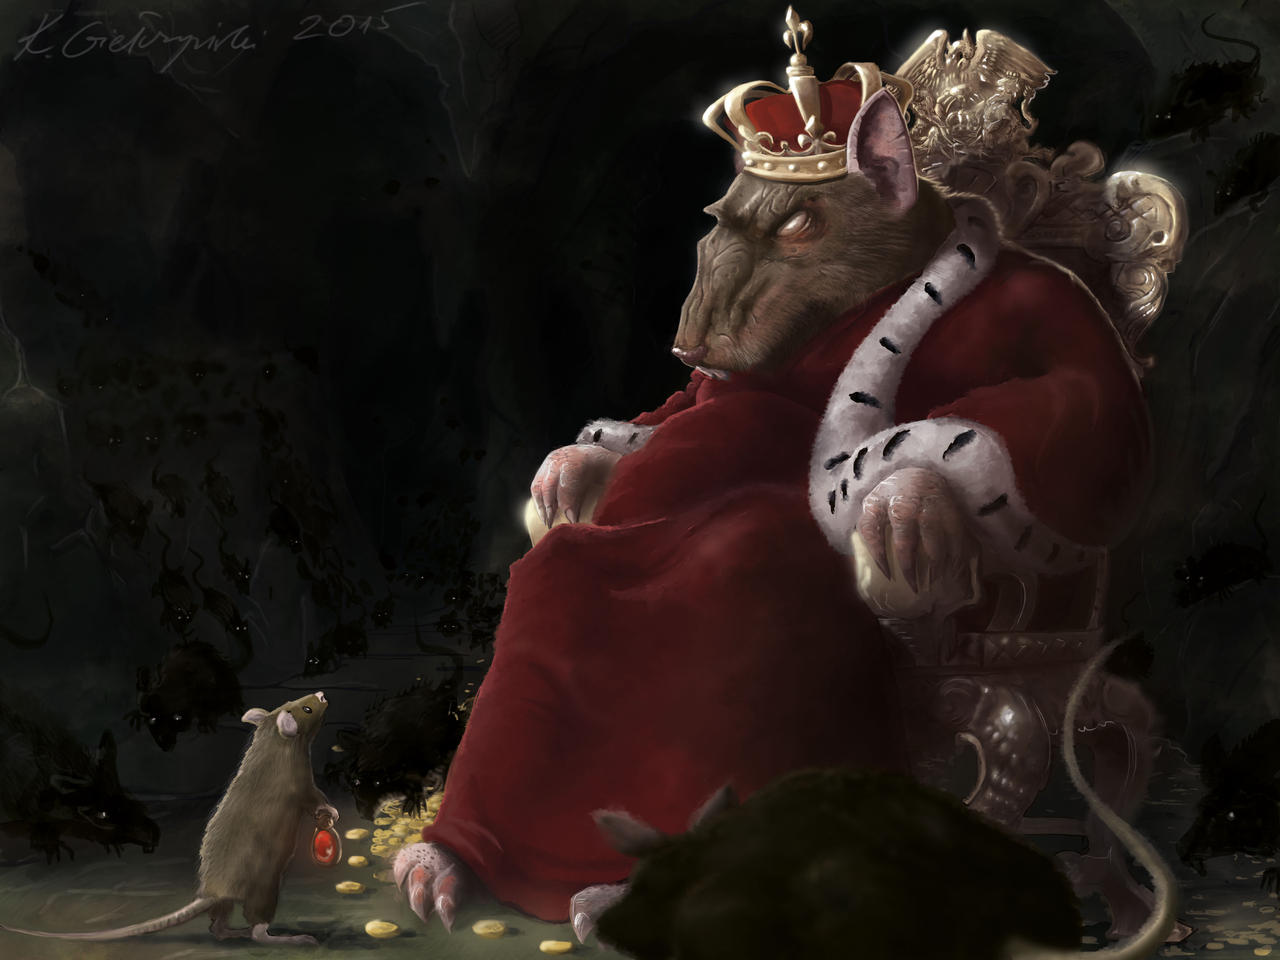 Rat King by Trasegorsuch on DeviantArt